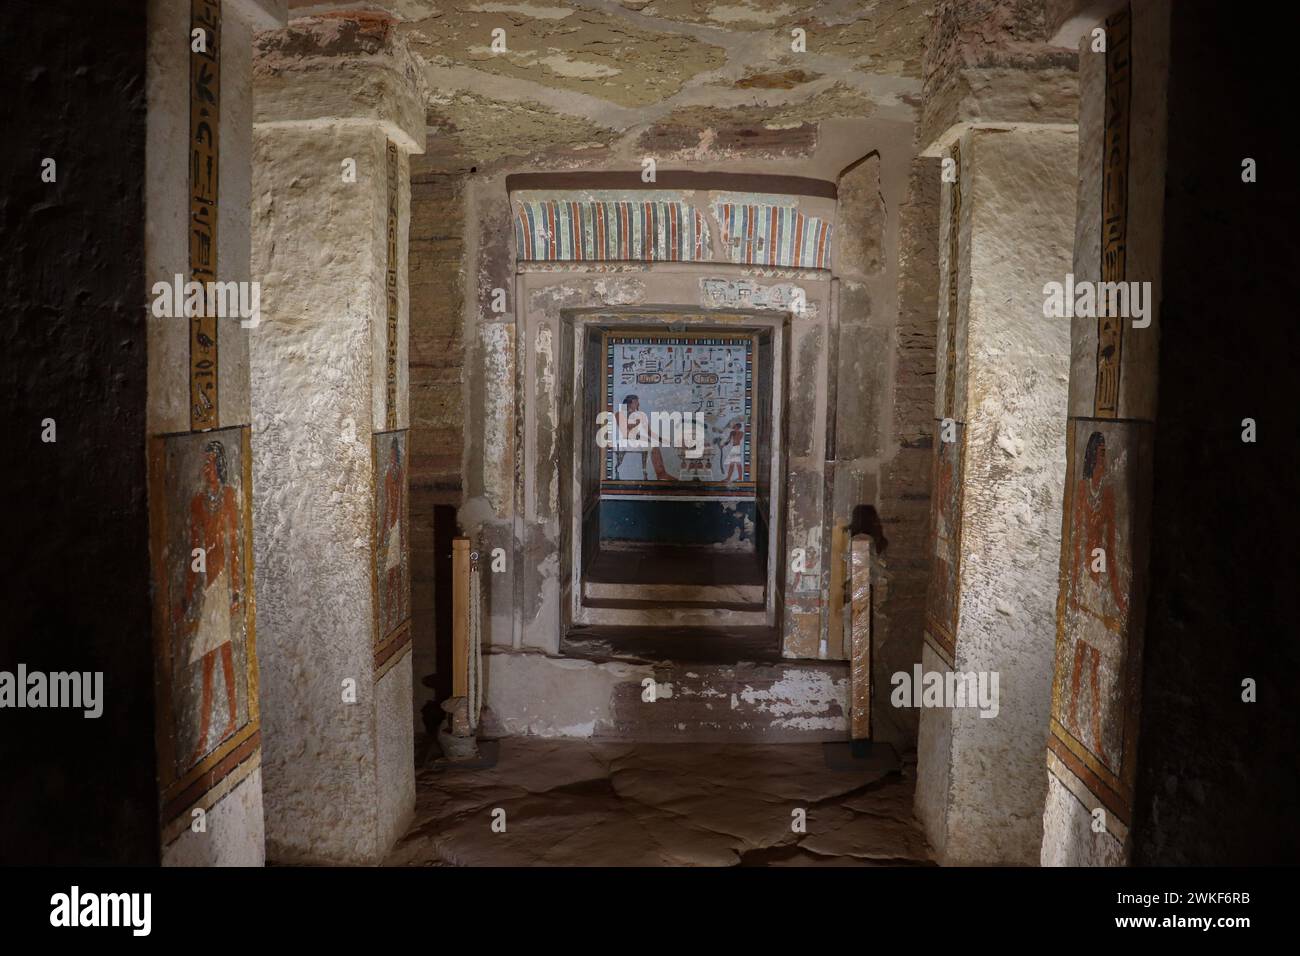 tombs of the nobles, west Aswan, Egypt Stock Photo